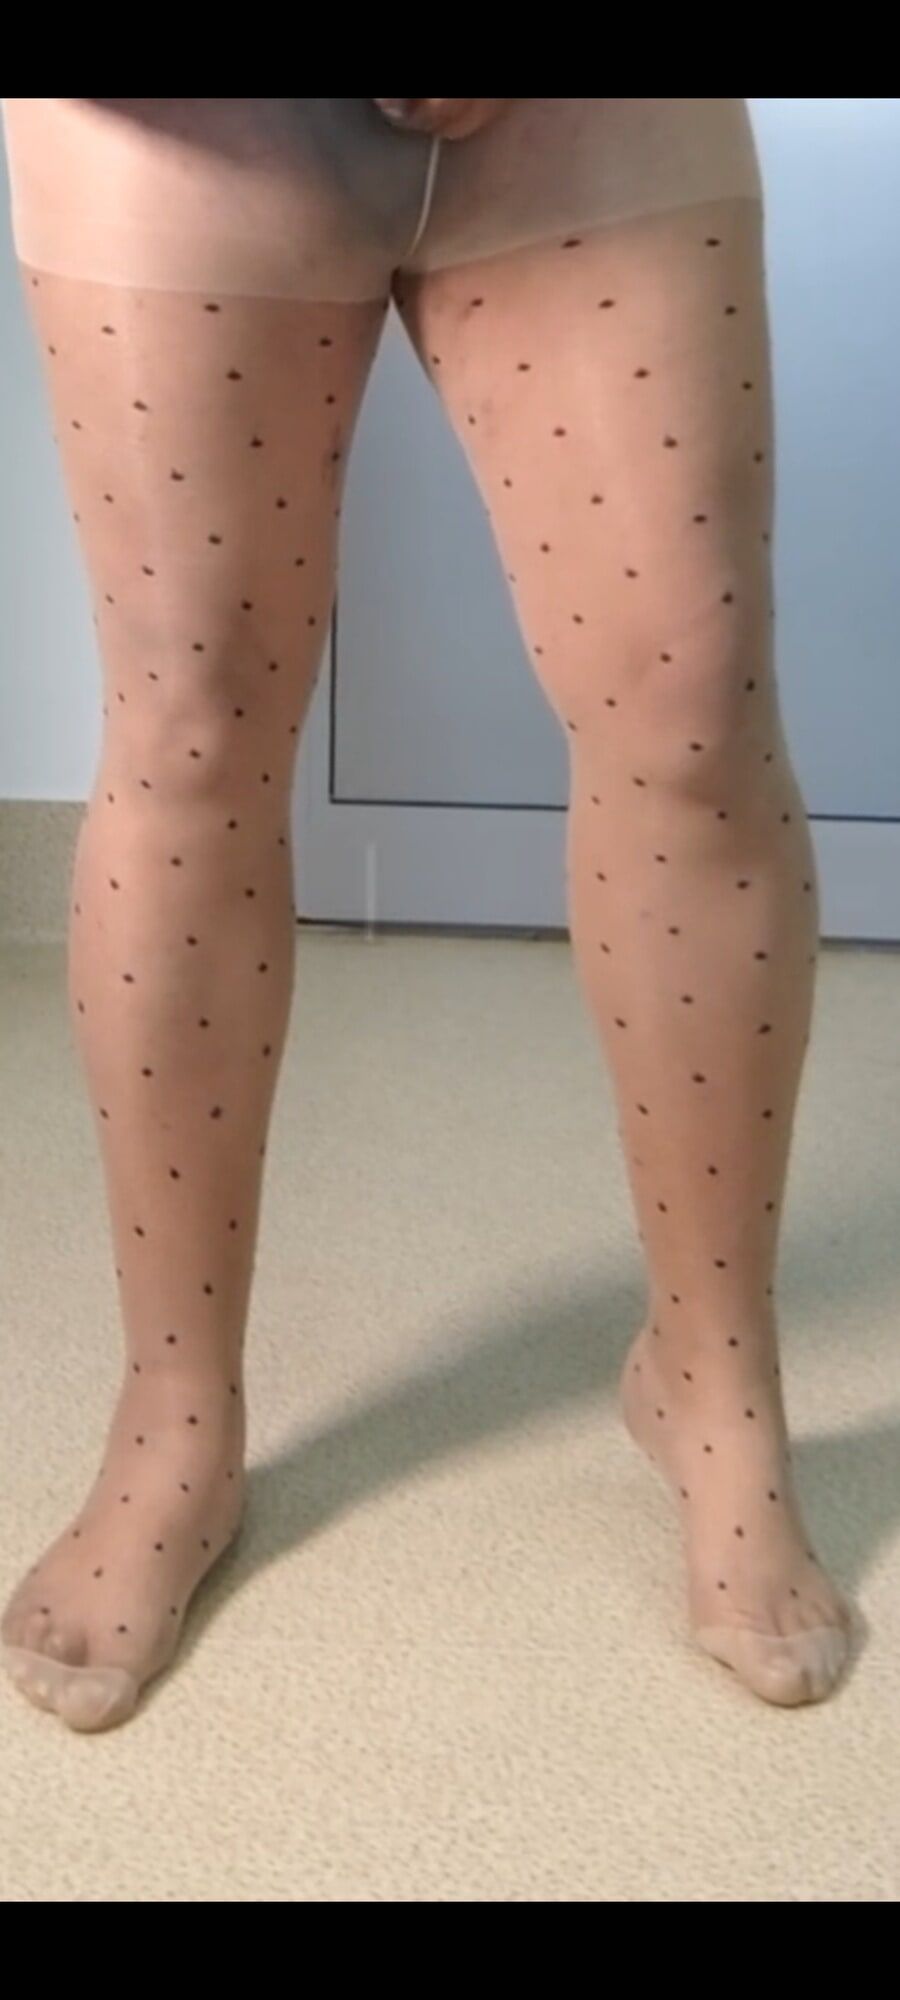 Sheer pantyhose with dots